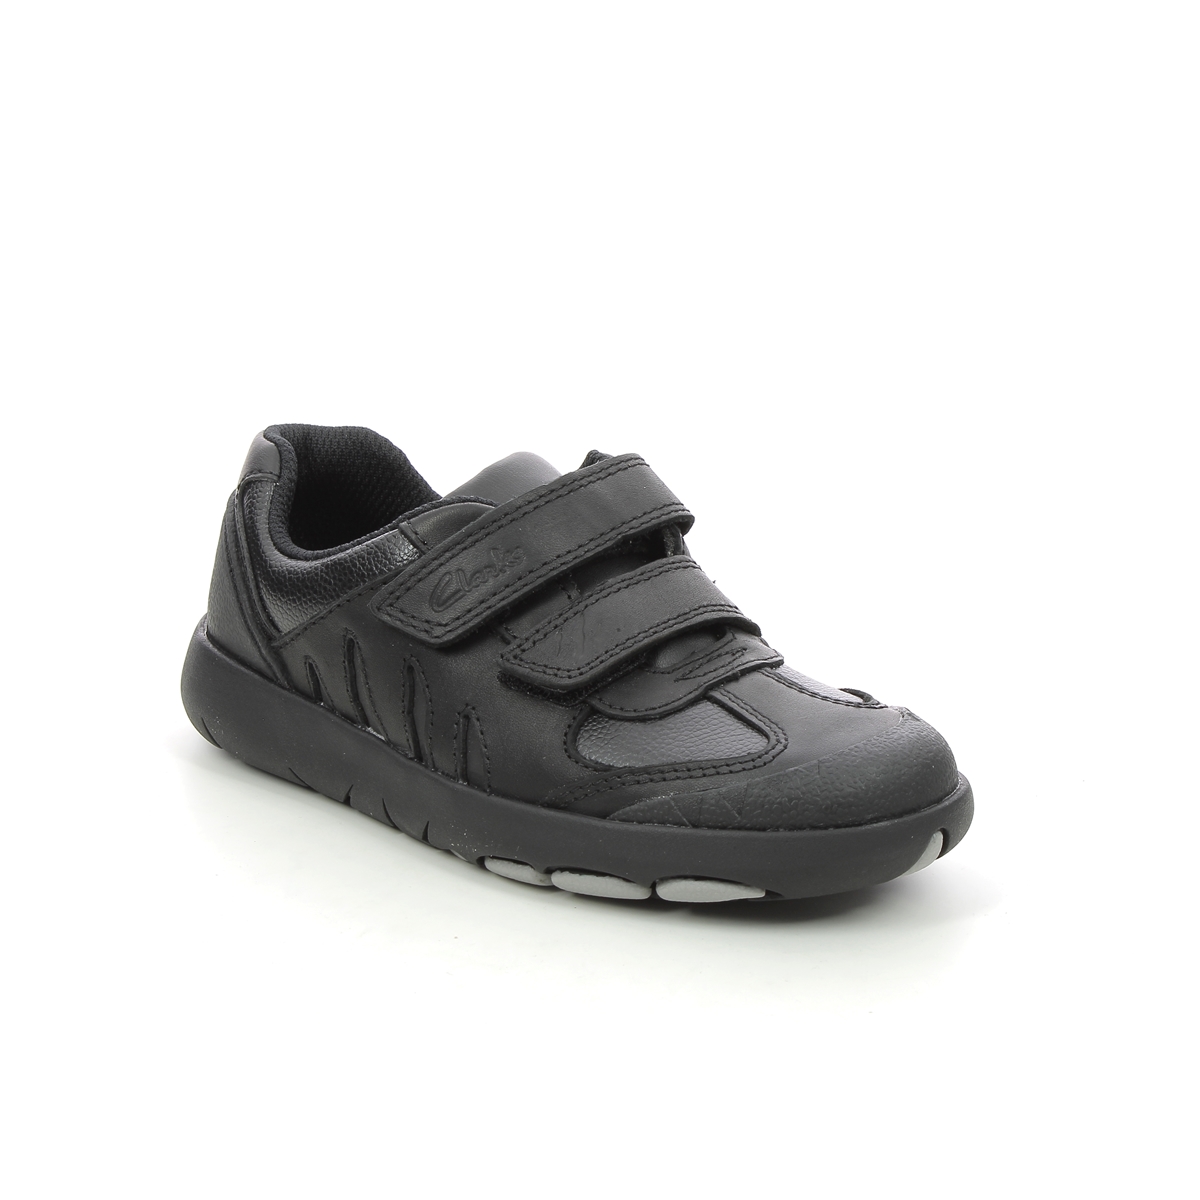 Clarks Rex Stride K Black leather Kids Boys Shoes 6269-87G in a Plain Leather in Size 10.5